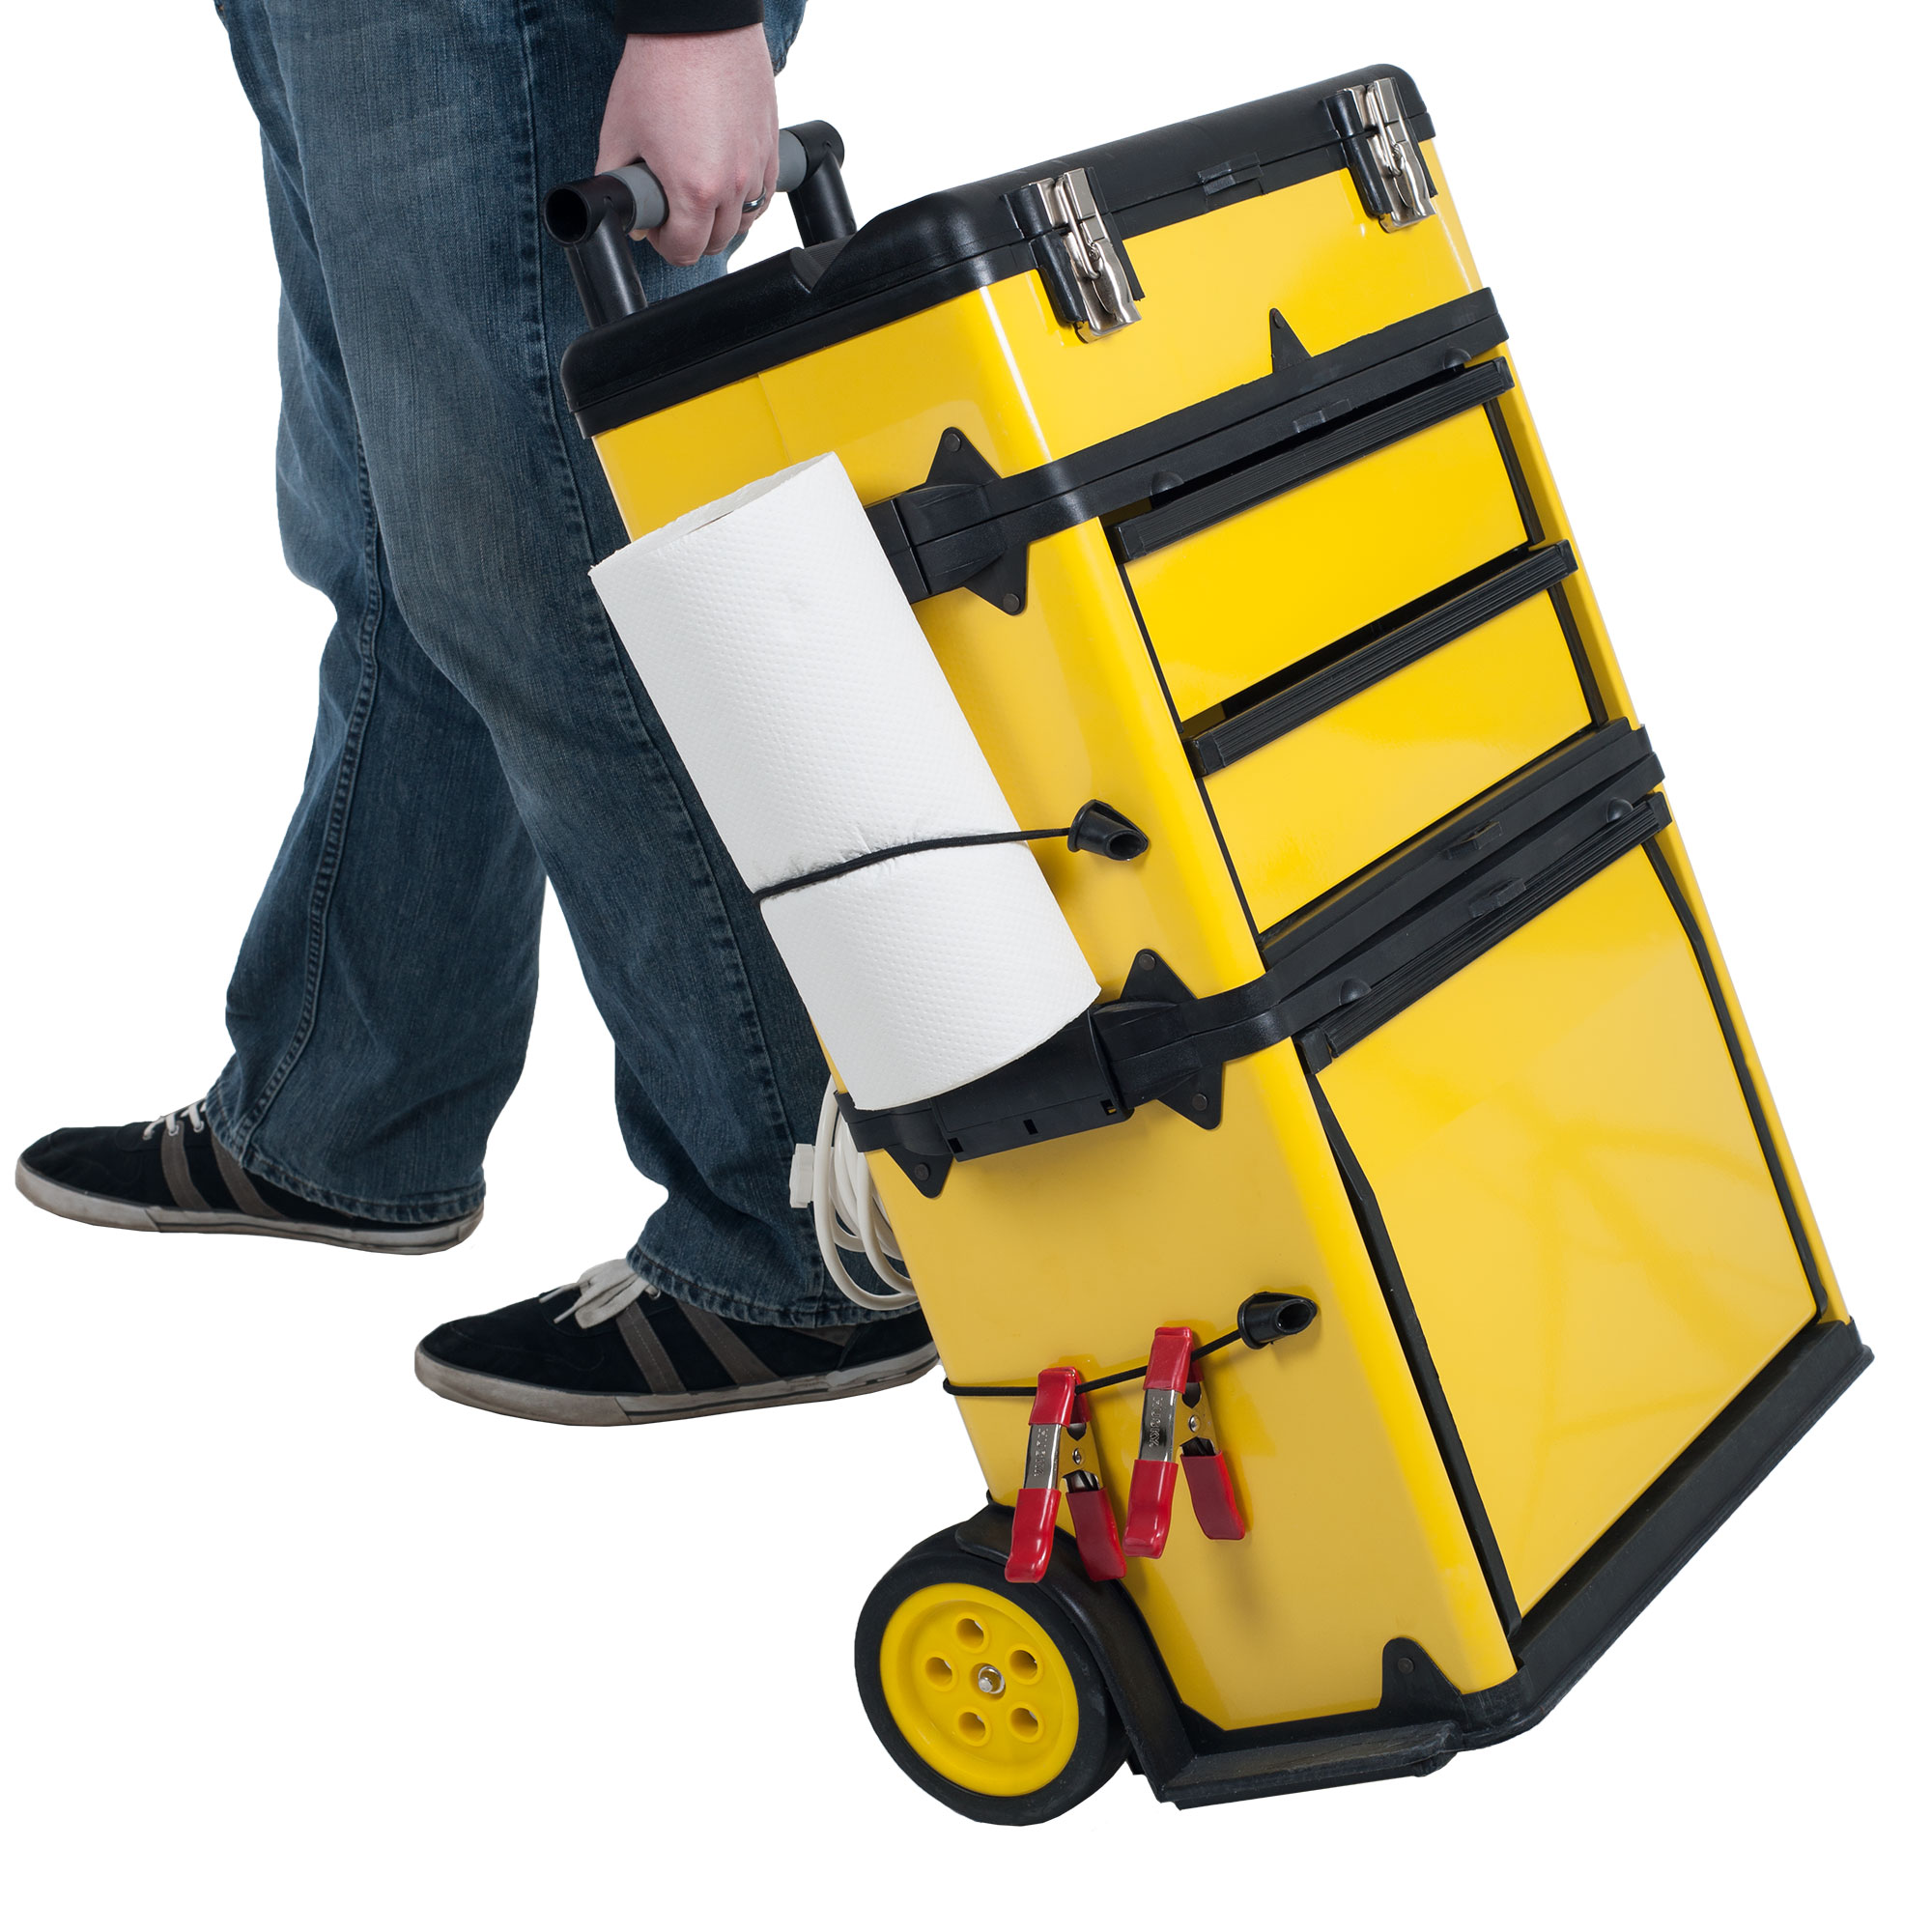 Stackable Toolbox Rolling Mobile Organizer with Telescopic Comfort Grip Handle ? Upright Rigid Pack Out Cart with Wheels and Drawers by Stalwart - image 8 of 9